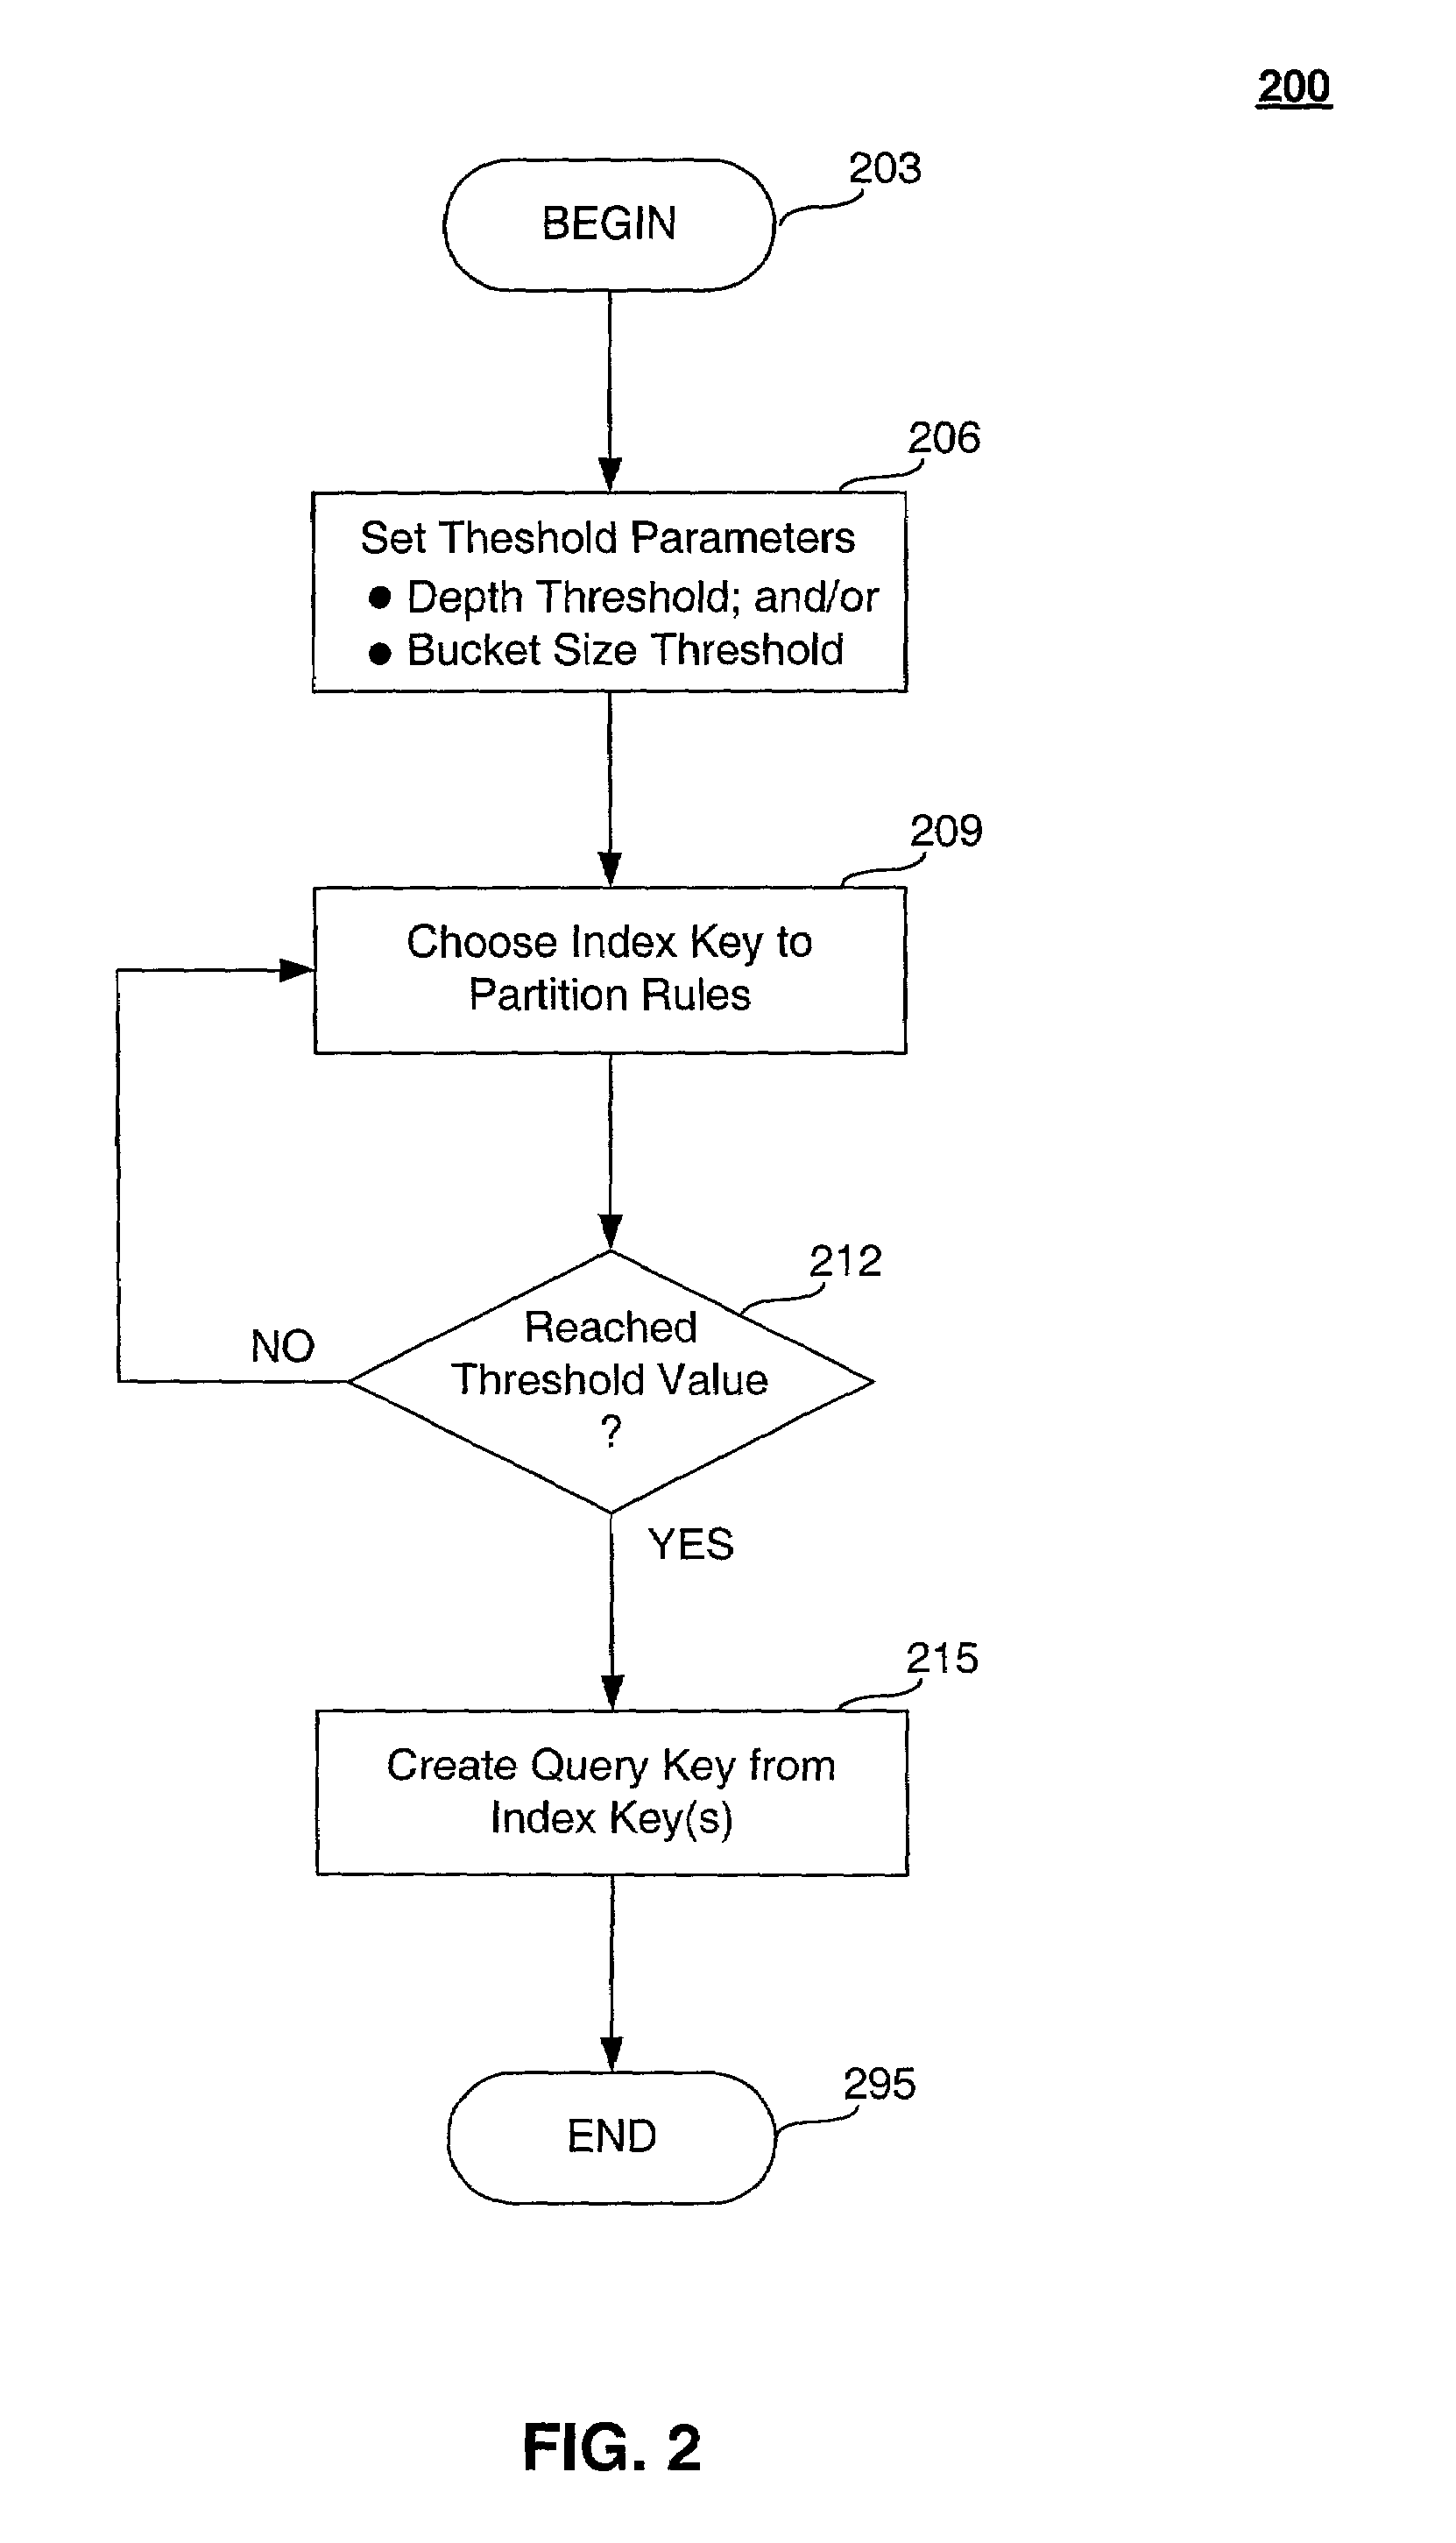 Method, system and computer program product for classifying packet flows with a bit mask